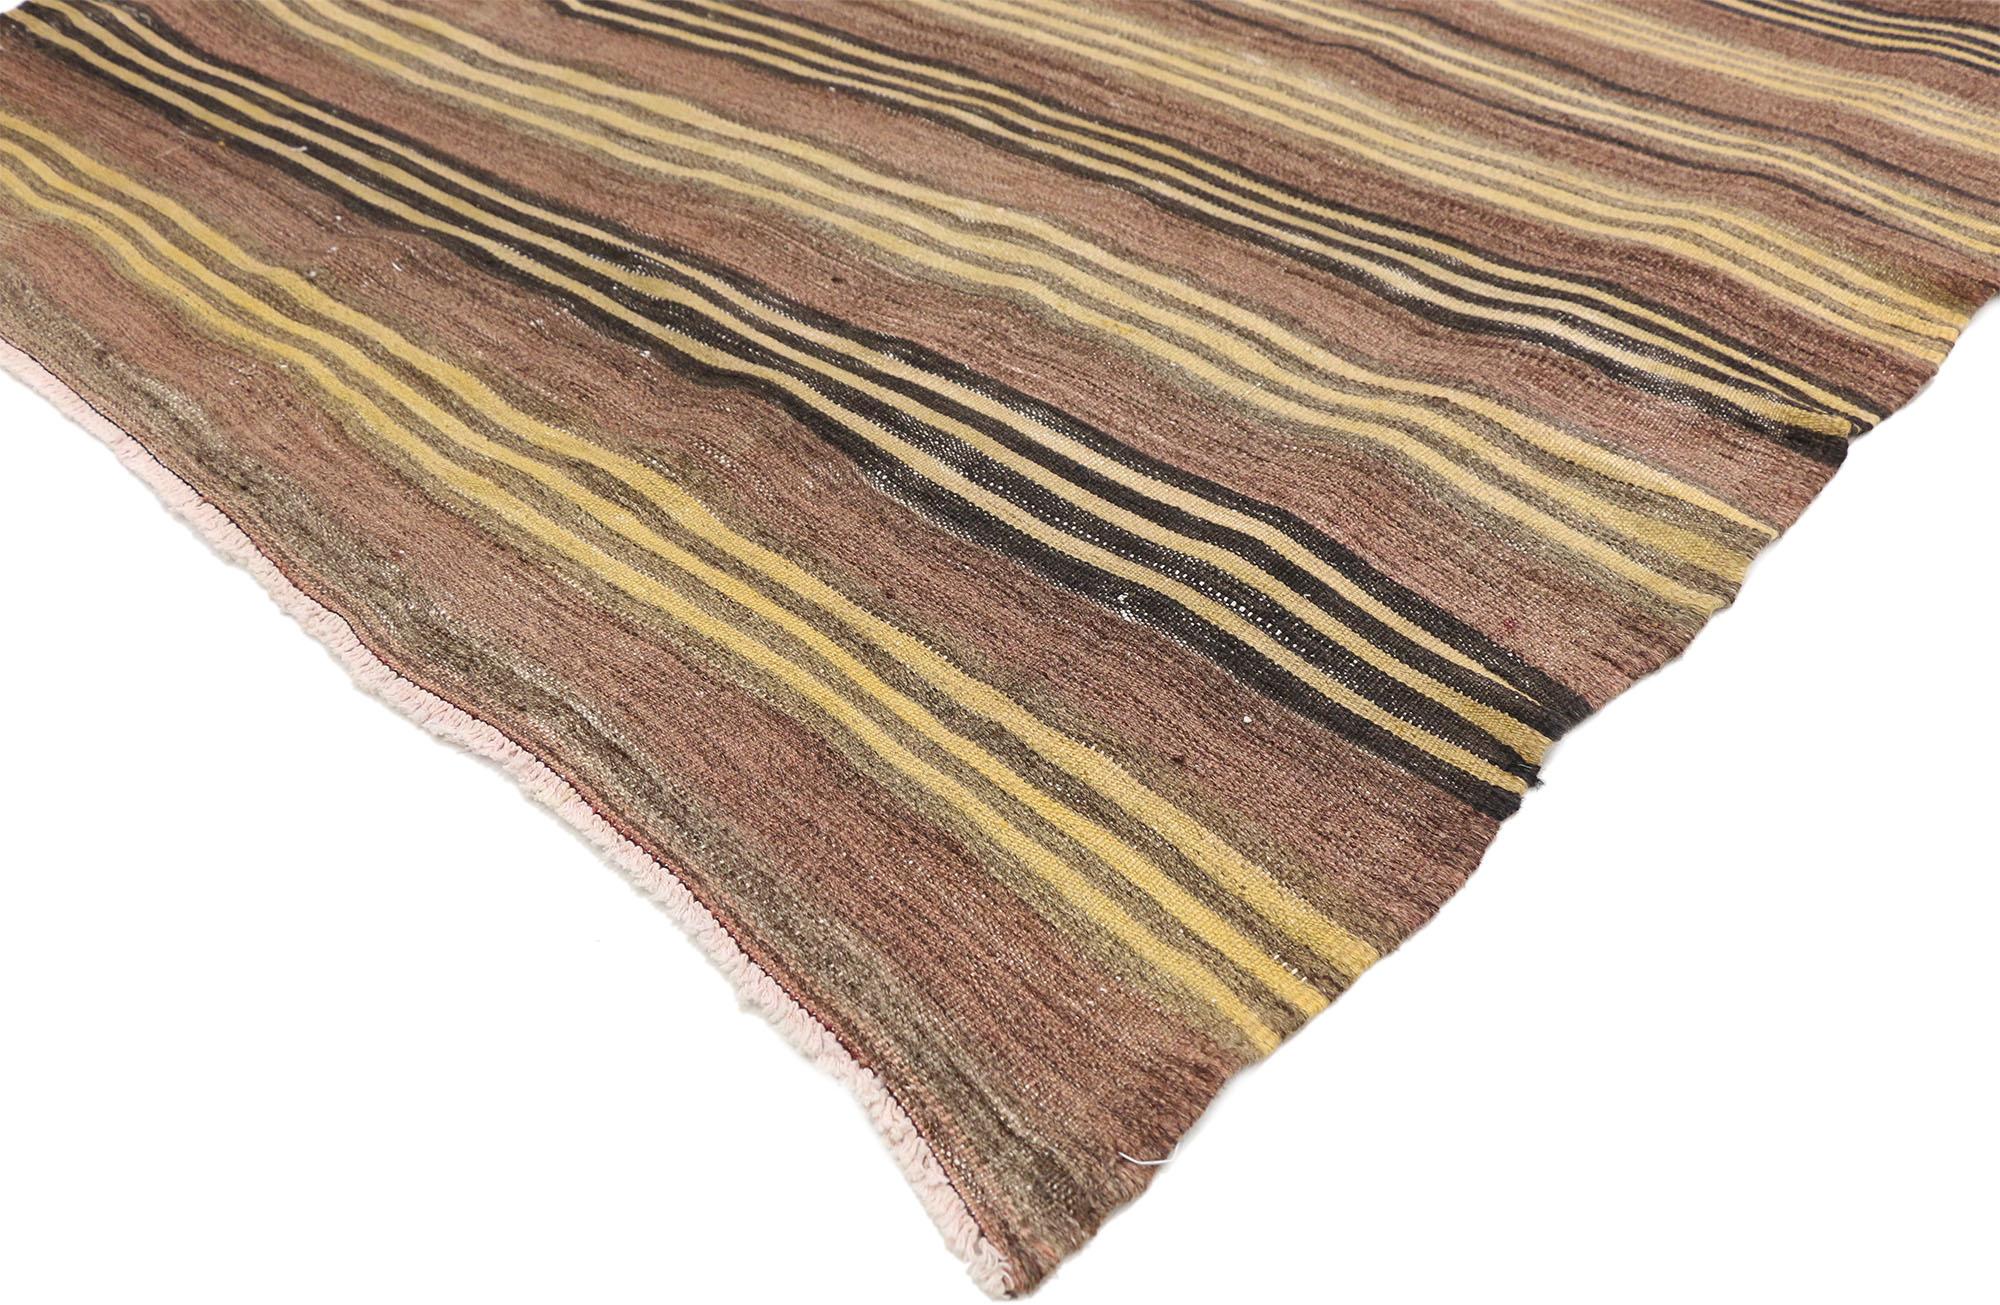 74875 Distressed Vintage Turkish Kilim Rug with Bayadere Stripes, Flat-Weave Striped Square Rug 04'05 x 04'08. This hand-woven wool distressed vintage Turkish Kilim rug with a modern style features a design composed of a series of narrow and wide